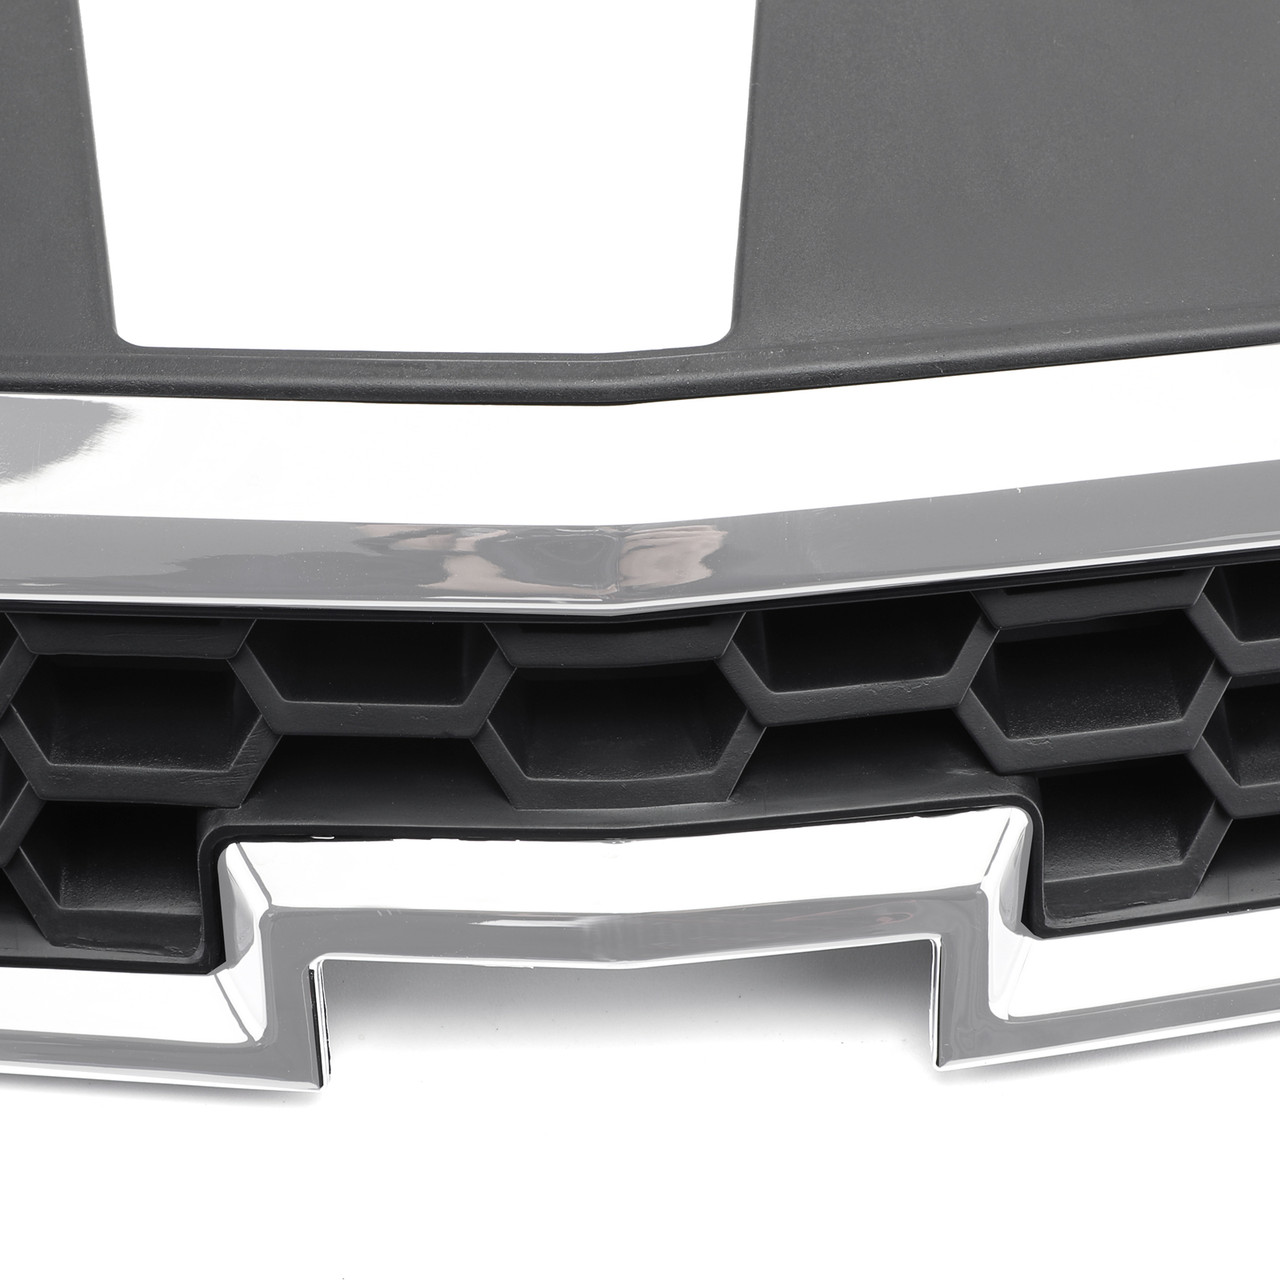 Front Upper Grill Inserts Trim Covers For Chevrolet Cruze 2009-2014 Black